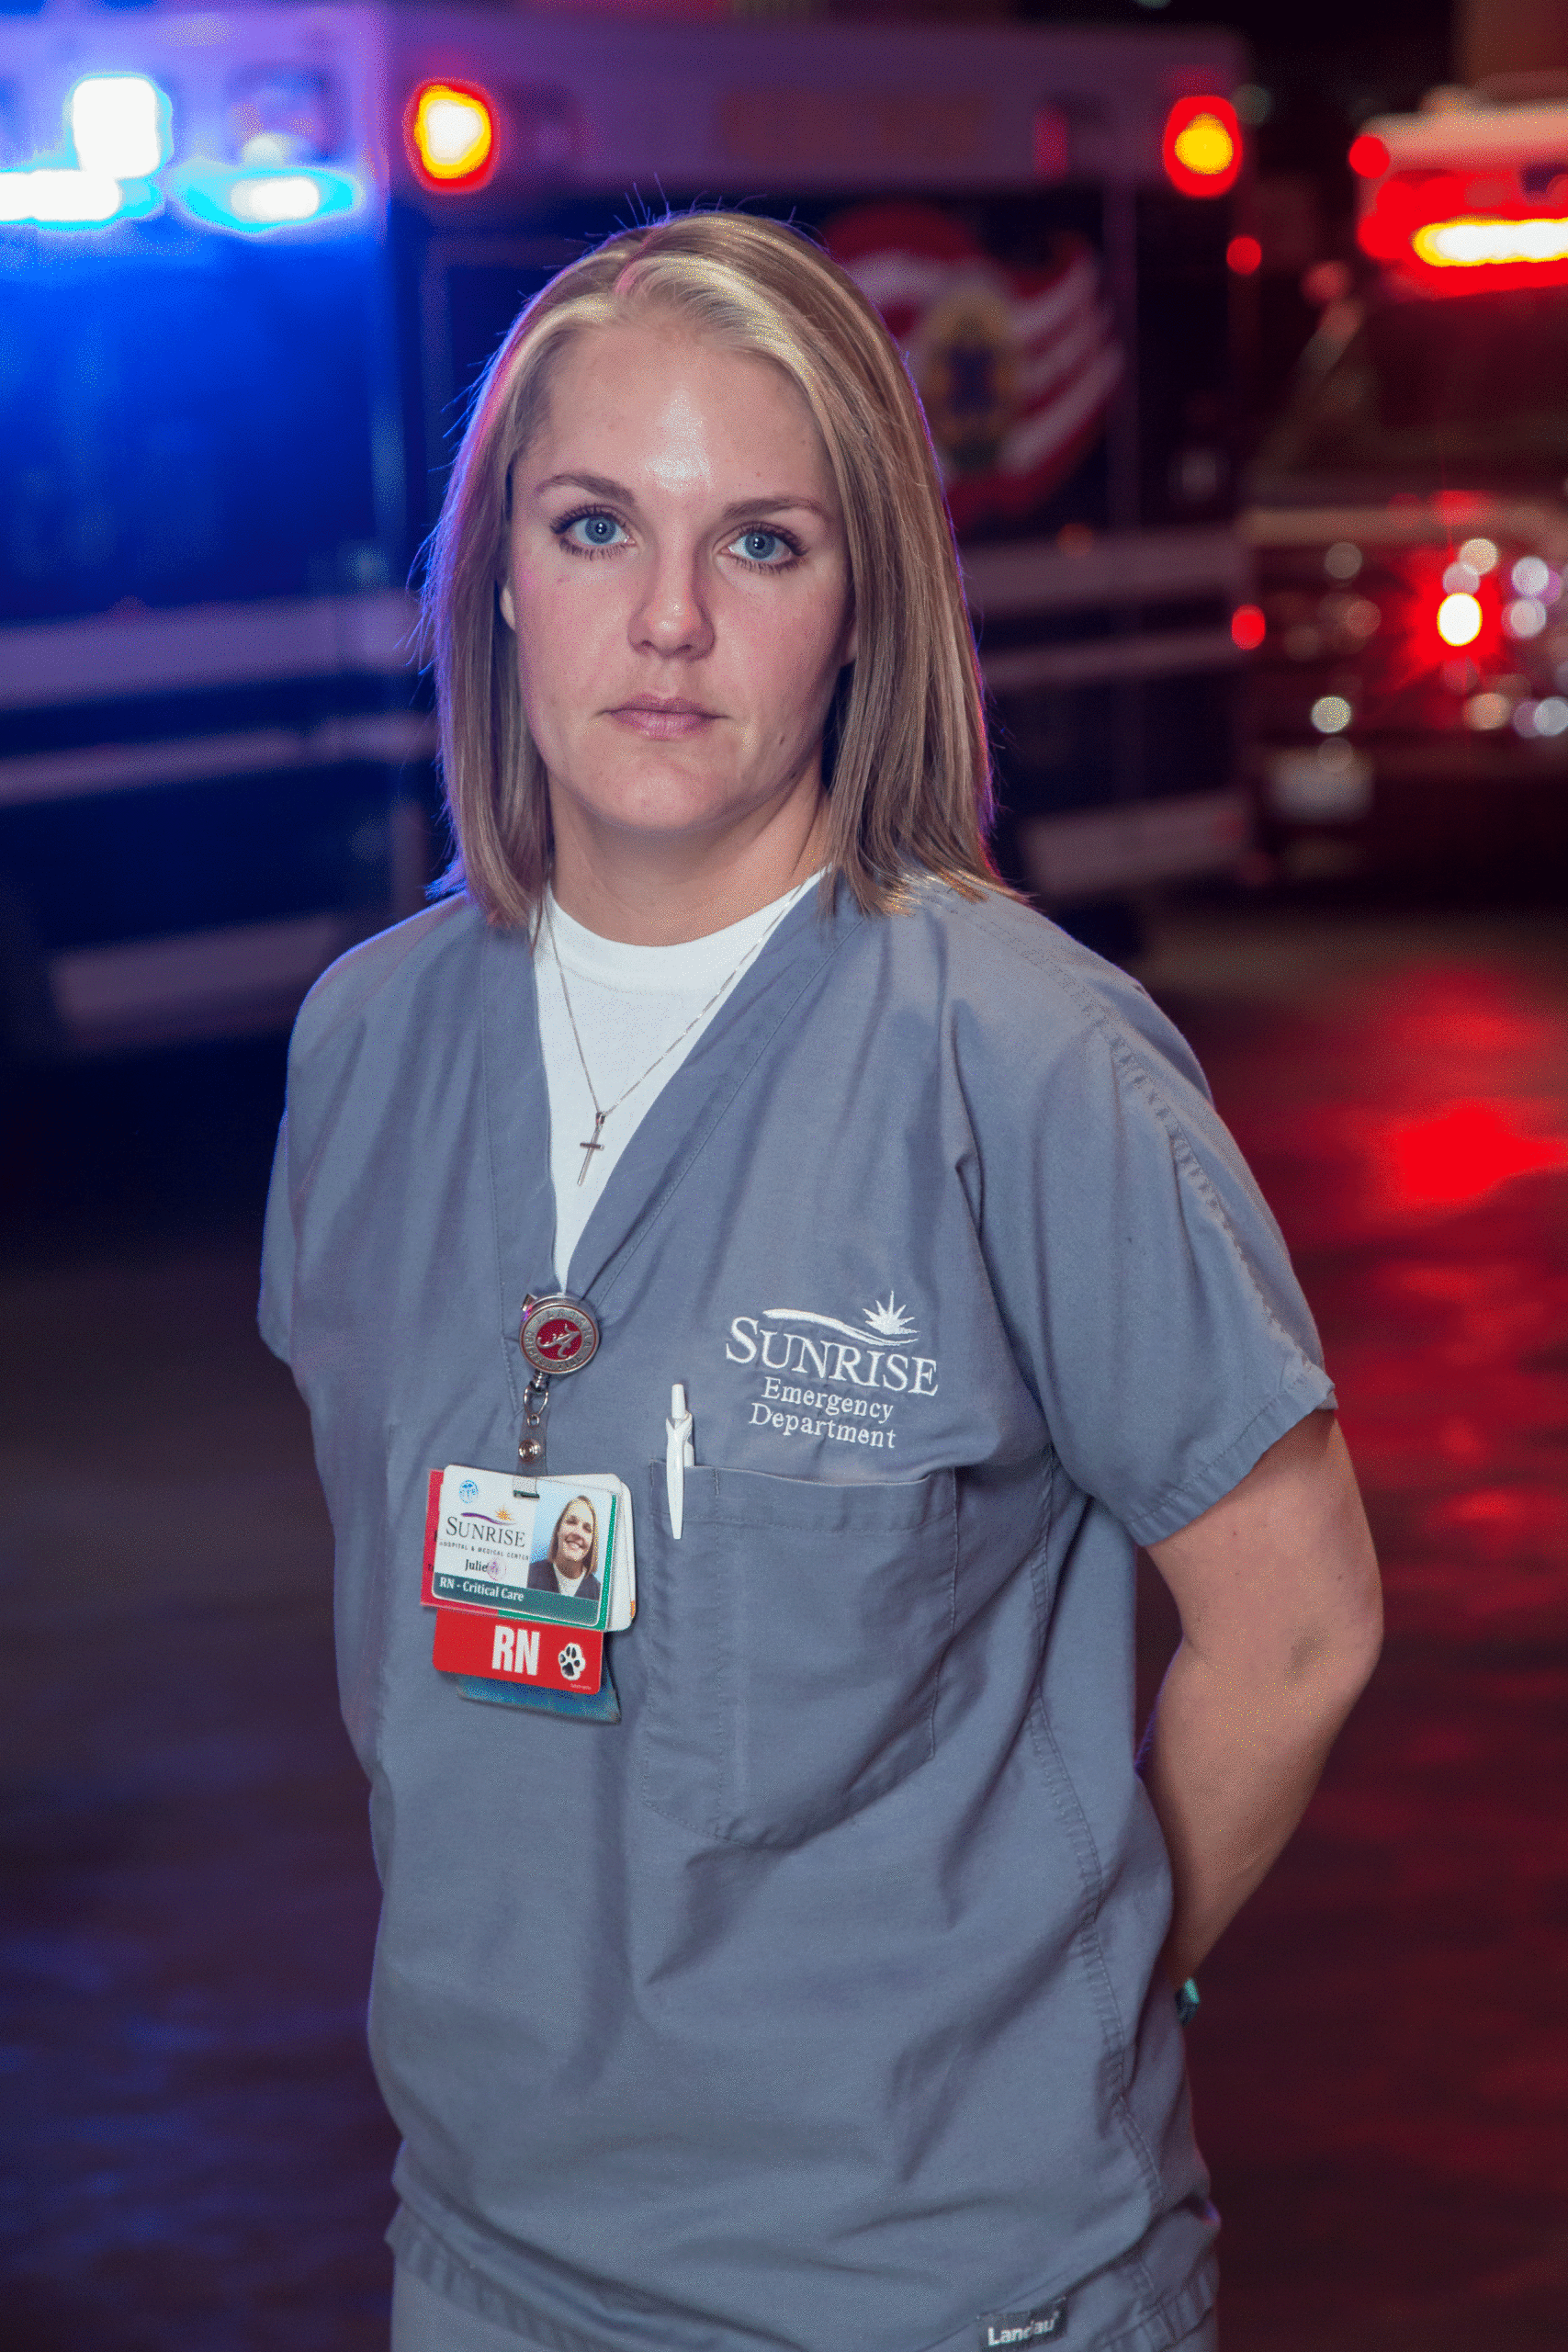 Female nurse with red and blue emergency lights behind her